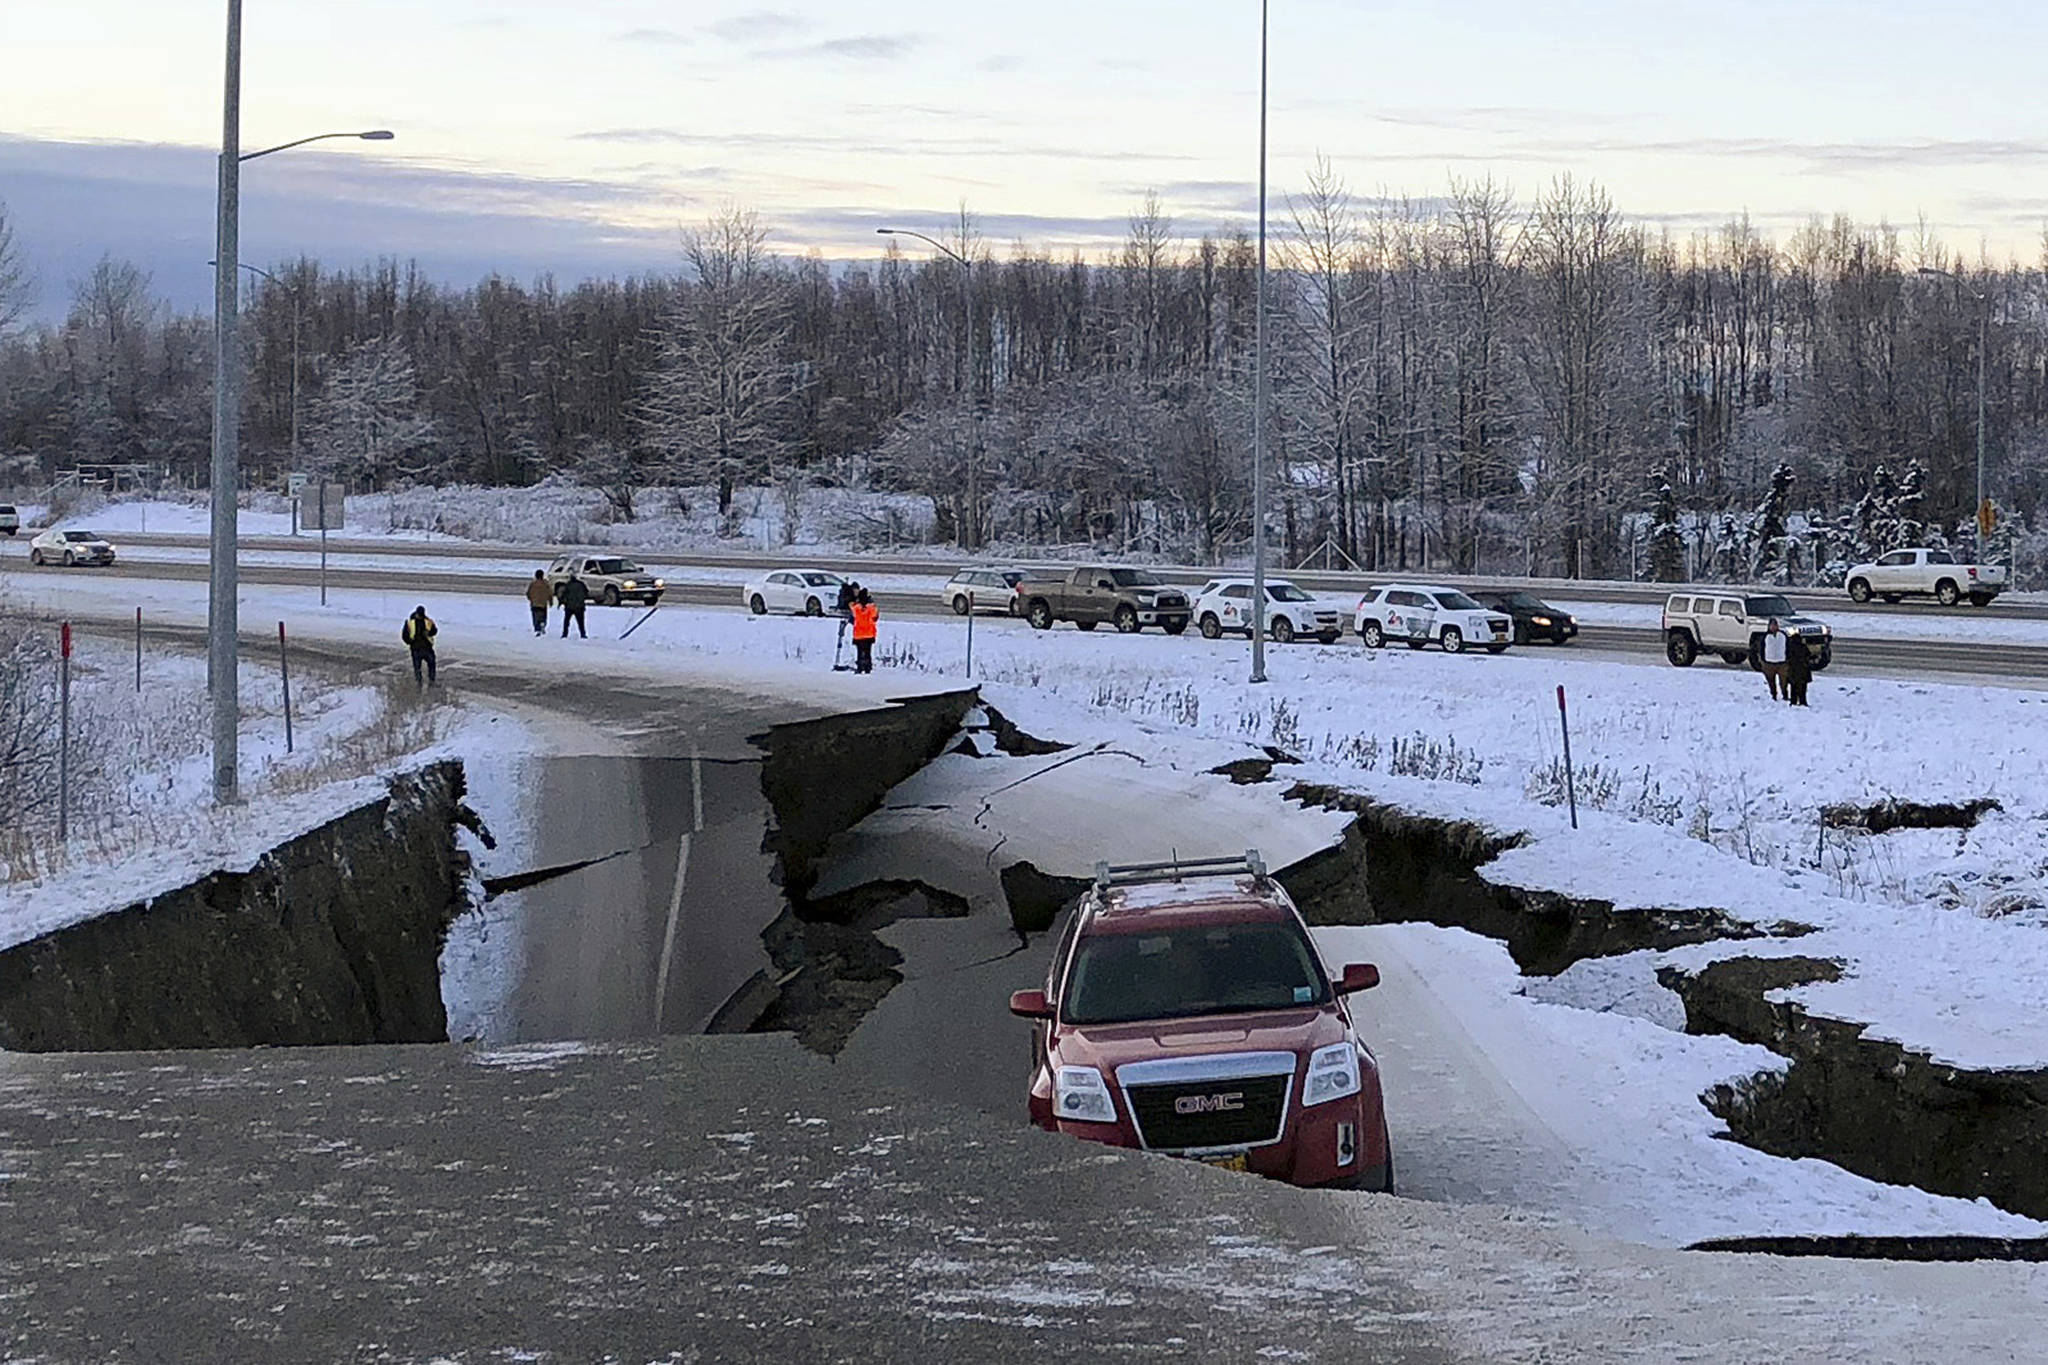 A car belonging to Homer resident Tom Sulczynski is trapped on a collapsed section of the offramp of Minnesota Drive in Anchorage, Friday, Nov. 30, 2018. Sulczynski and passenger Bekah Taylor escaped the car without injury. Back-to-back earthquakes measuring 7.0 and 5.8 rocked buildings and buckled roads Friday morning in Anchorage, prompting people to run from their offices or seek shelter under office desks, while a tsunami warning had some seeking higher ground. (AP Photo/Dan Joling)